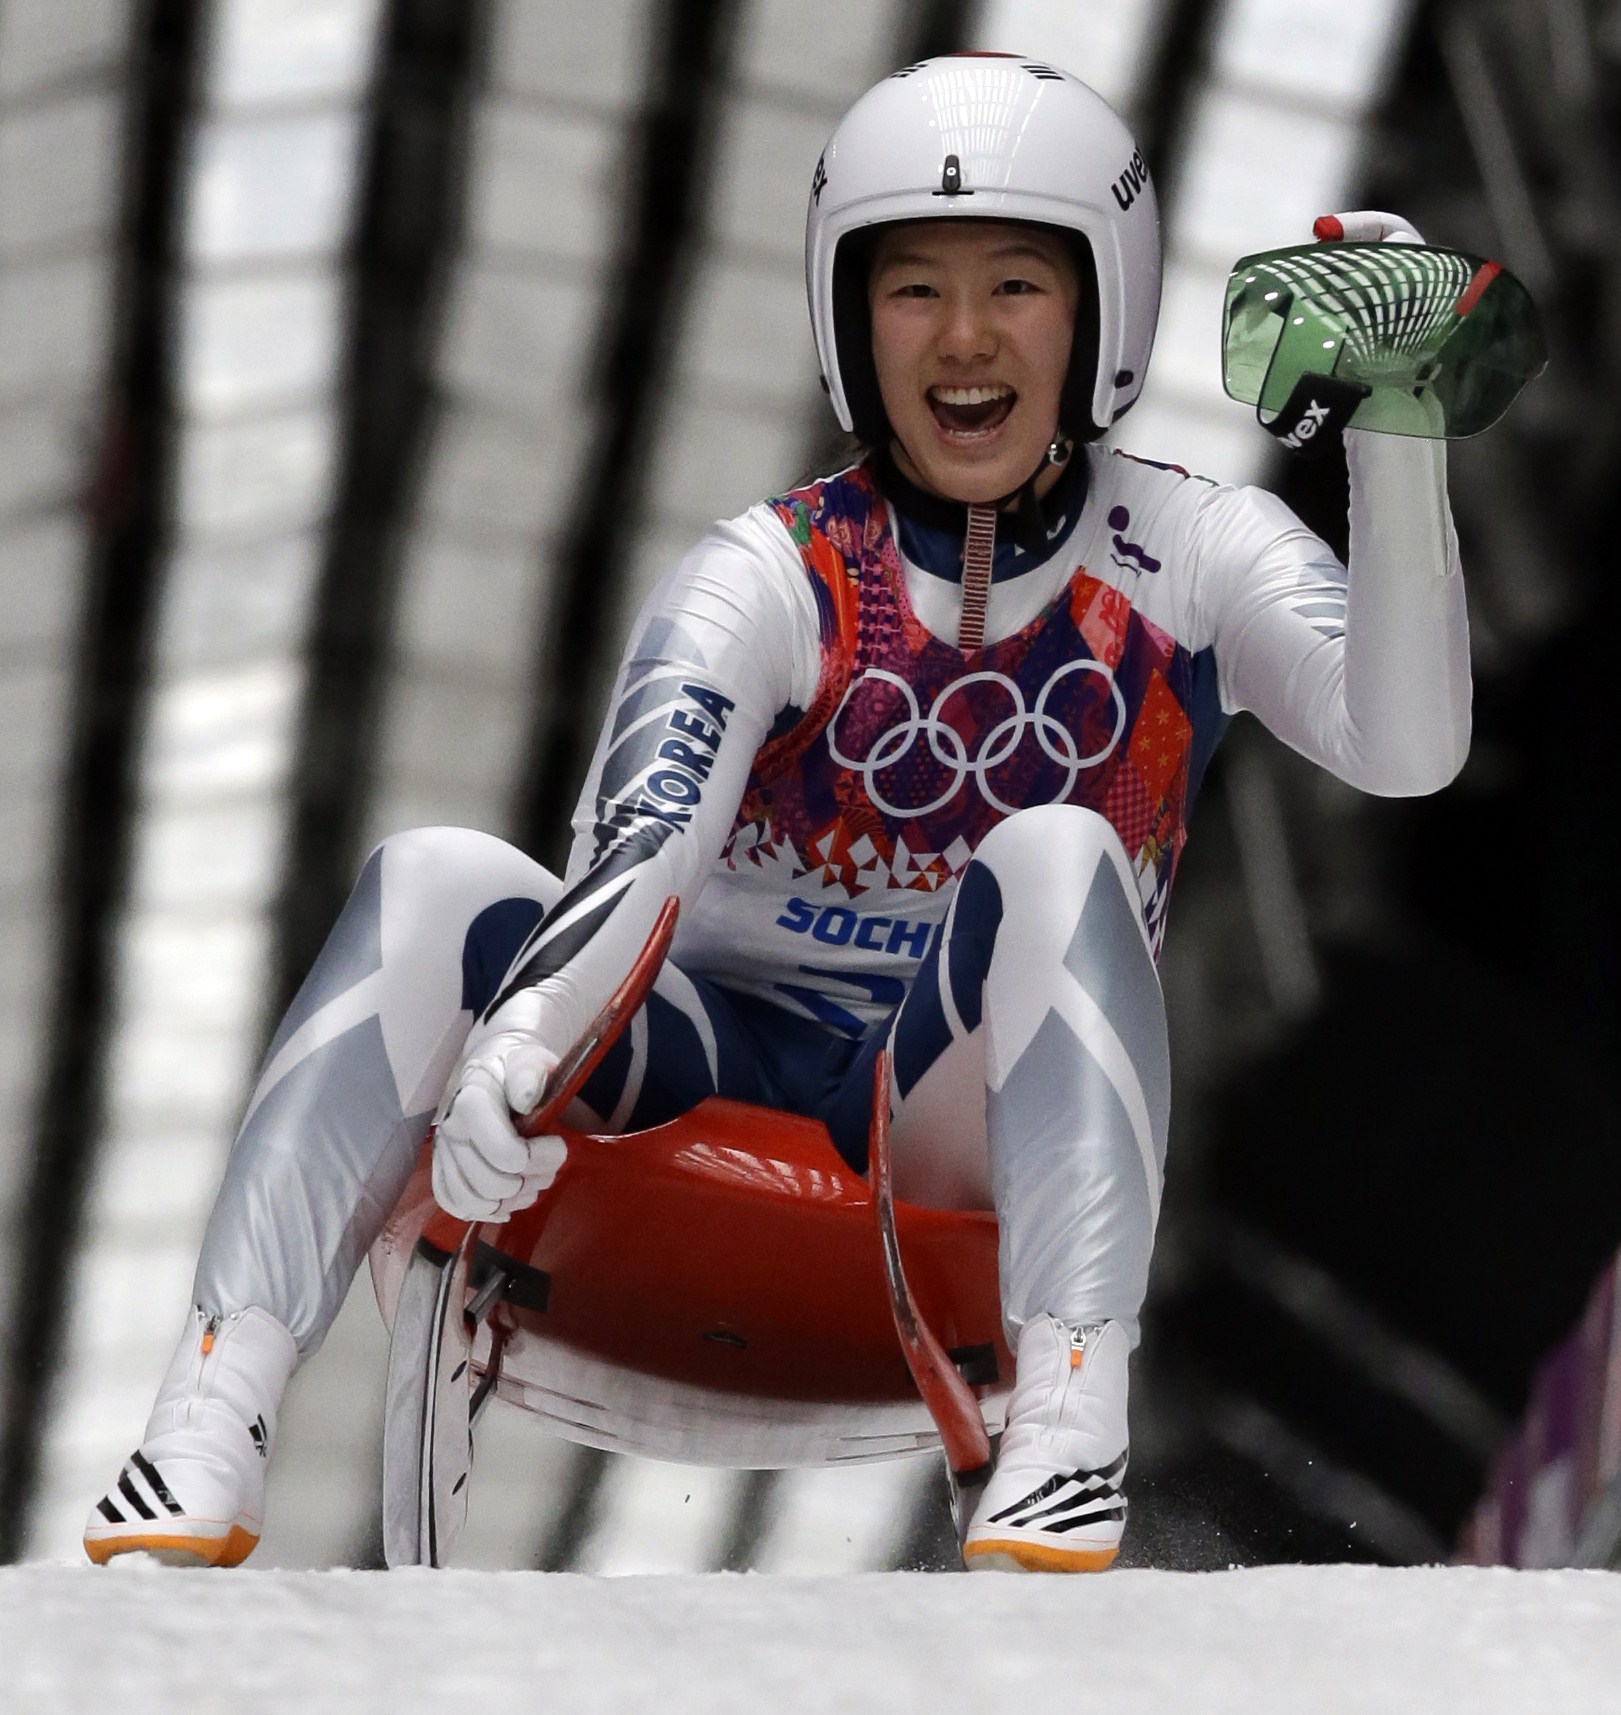 Sung Eunryung of S. Korea cheers after her final run during the women's singles luge competition at the 2014 Winter Olympics, Tuesday, Feb. 11, 2014, in Krasnaya Polyana, Russia. (AP Photo/Dita Alangkara)